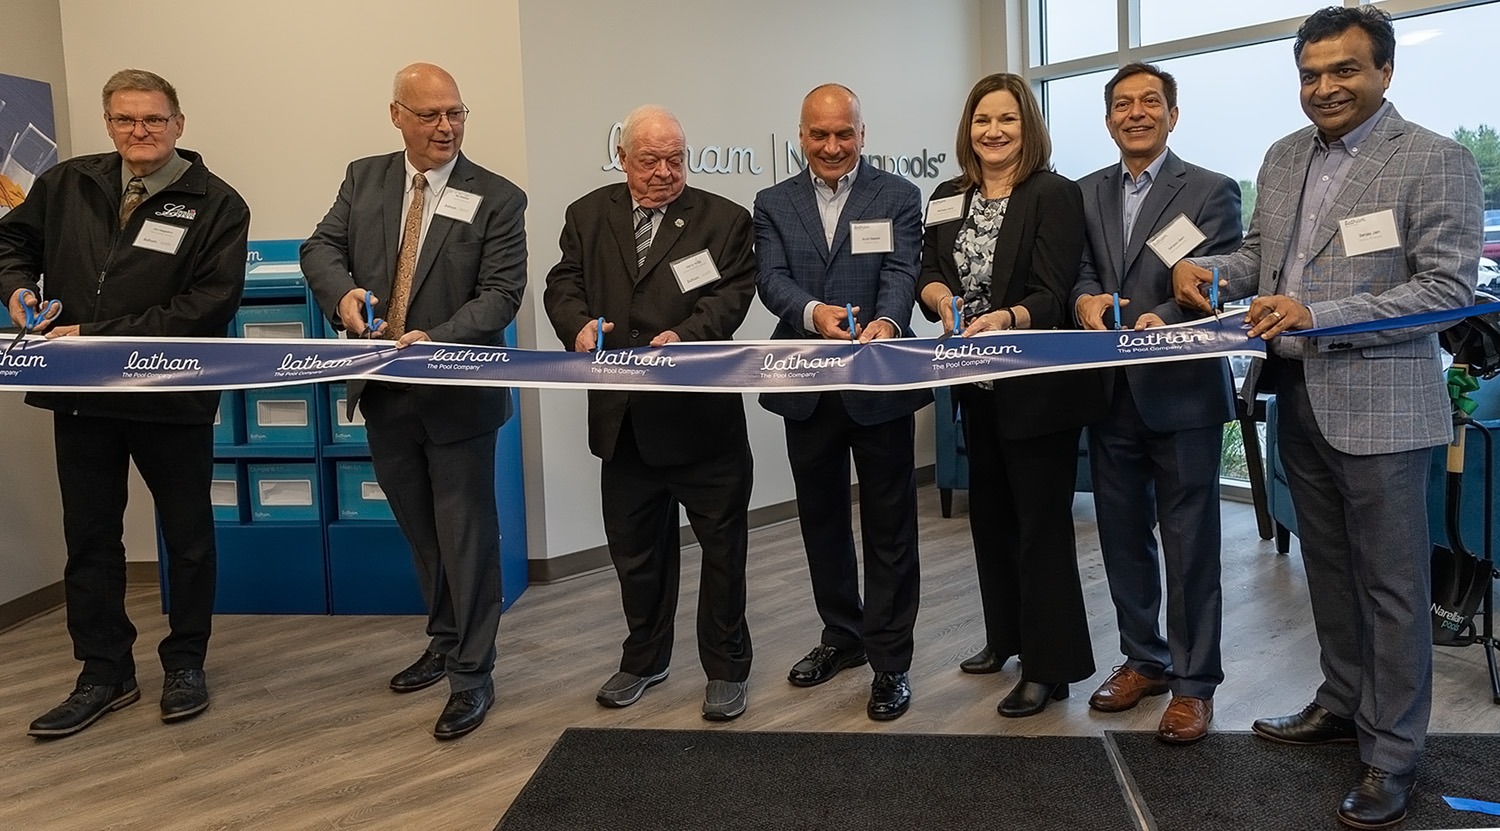 Image of Local officials and Latham Executives cutting the ribbon.